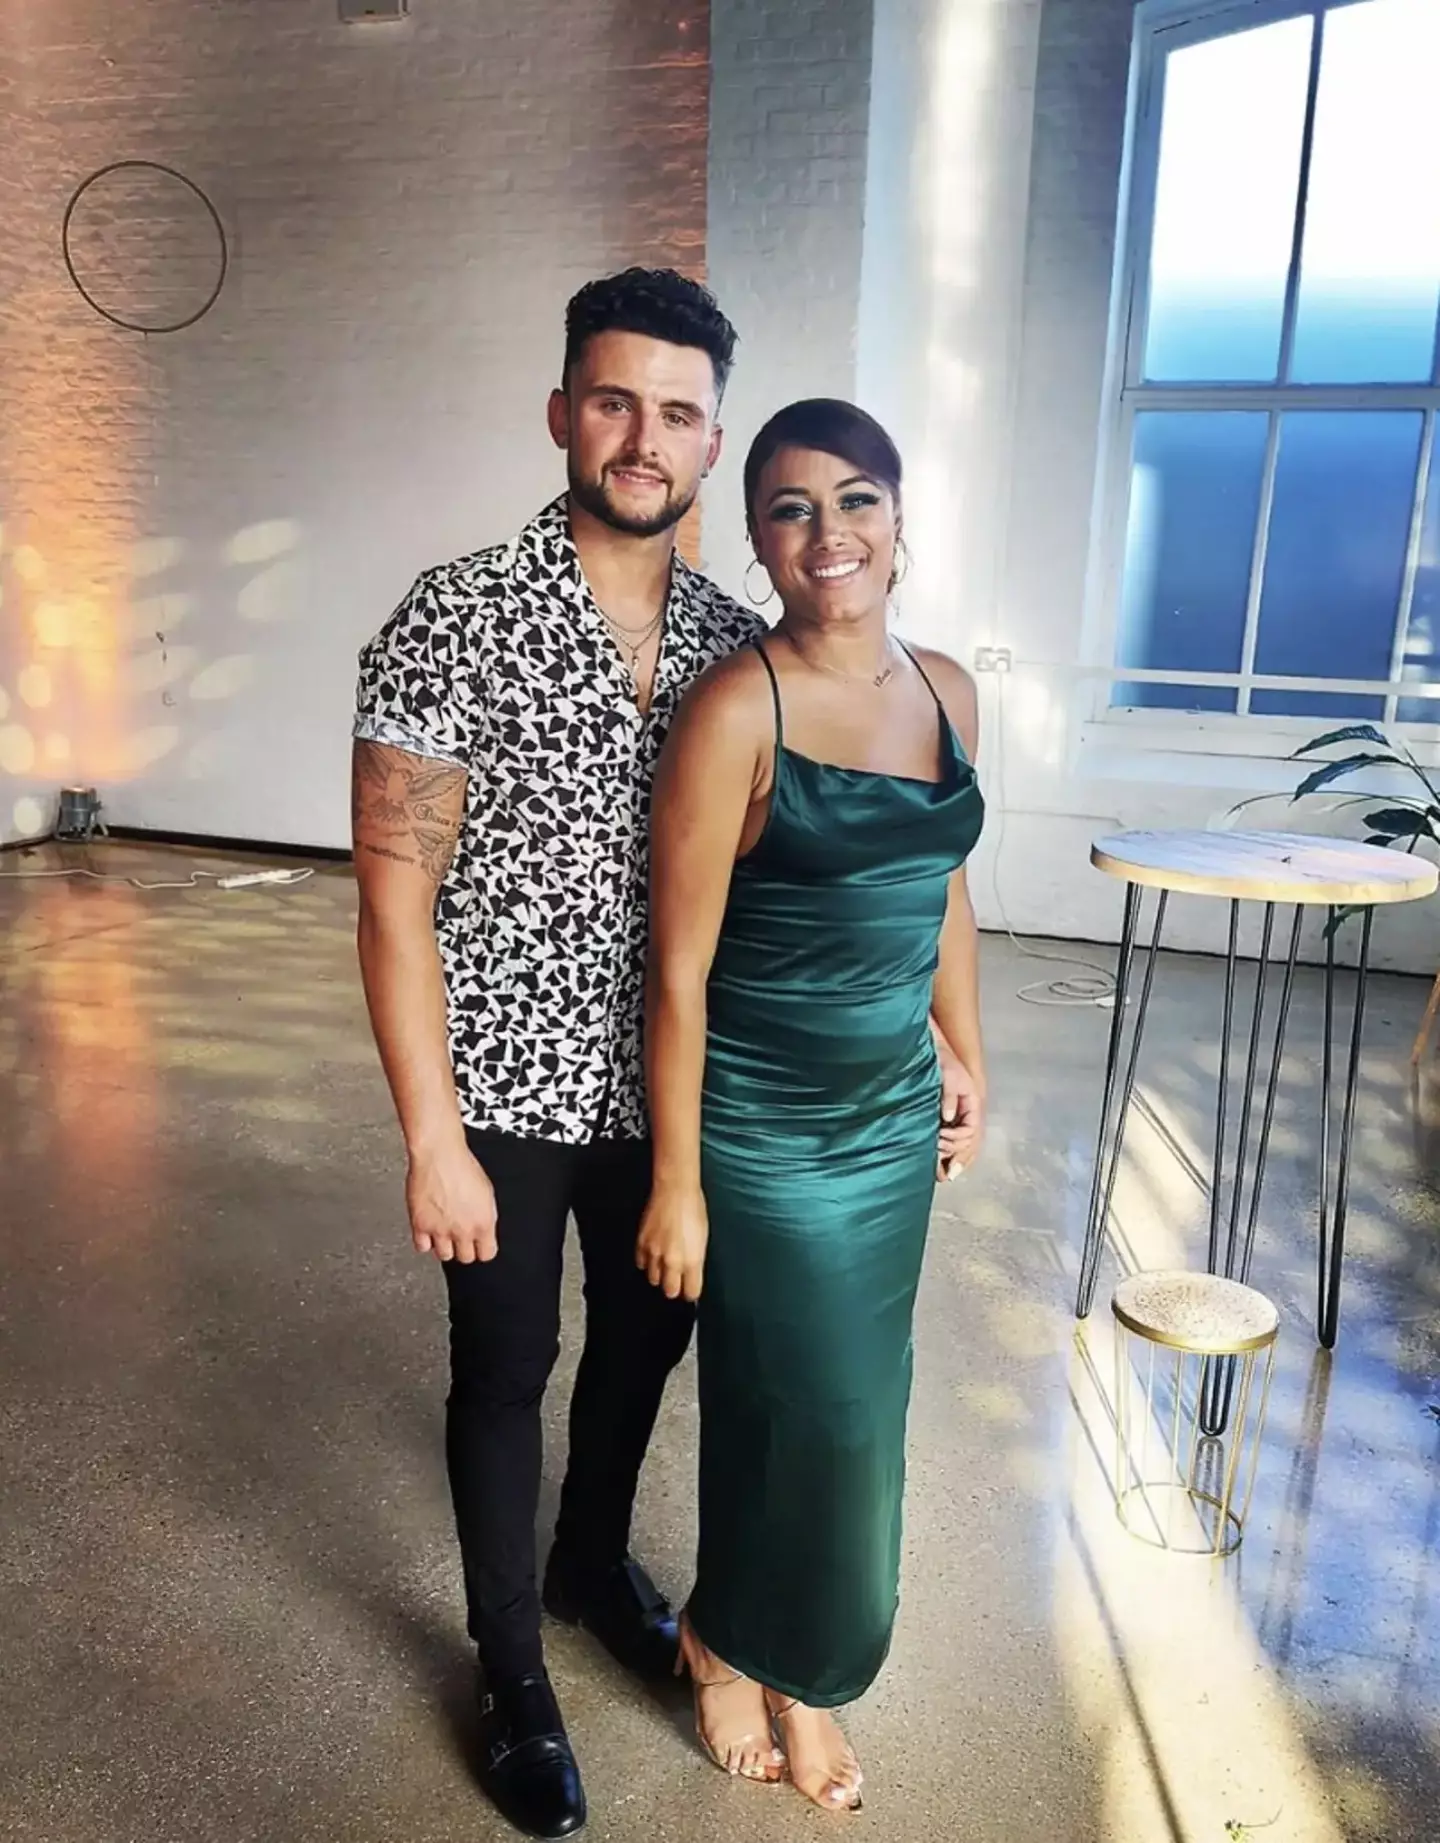 Viewers were shocked to discover Jordan and Chanita had split.